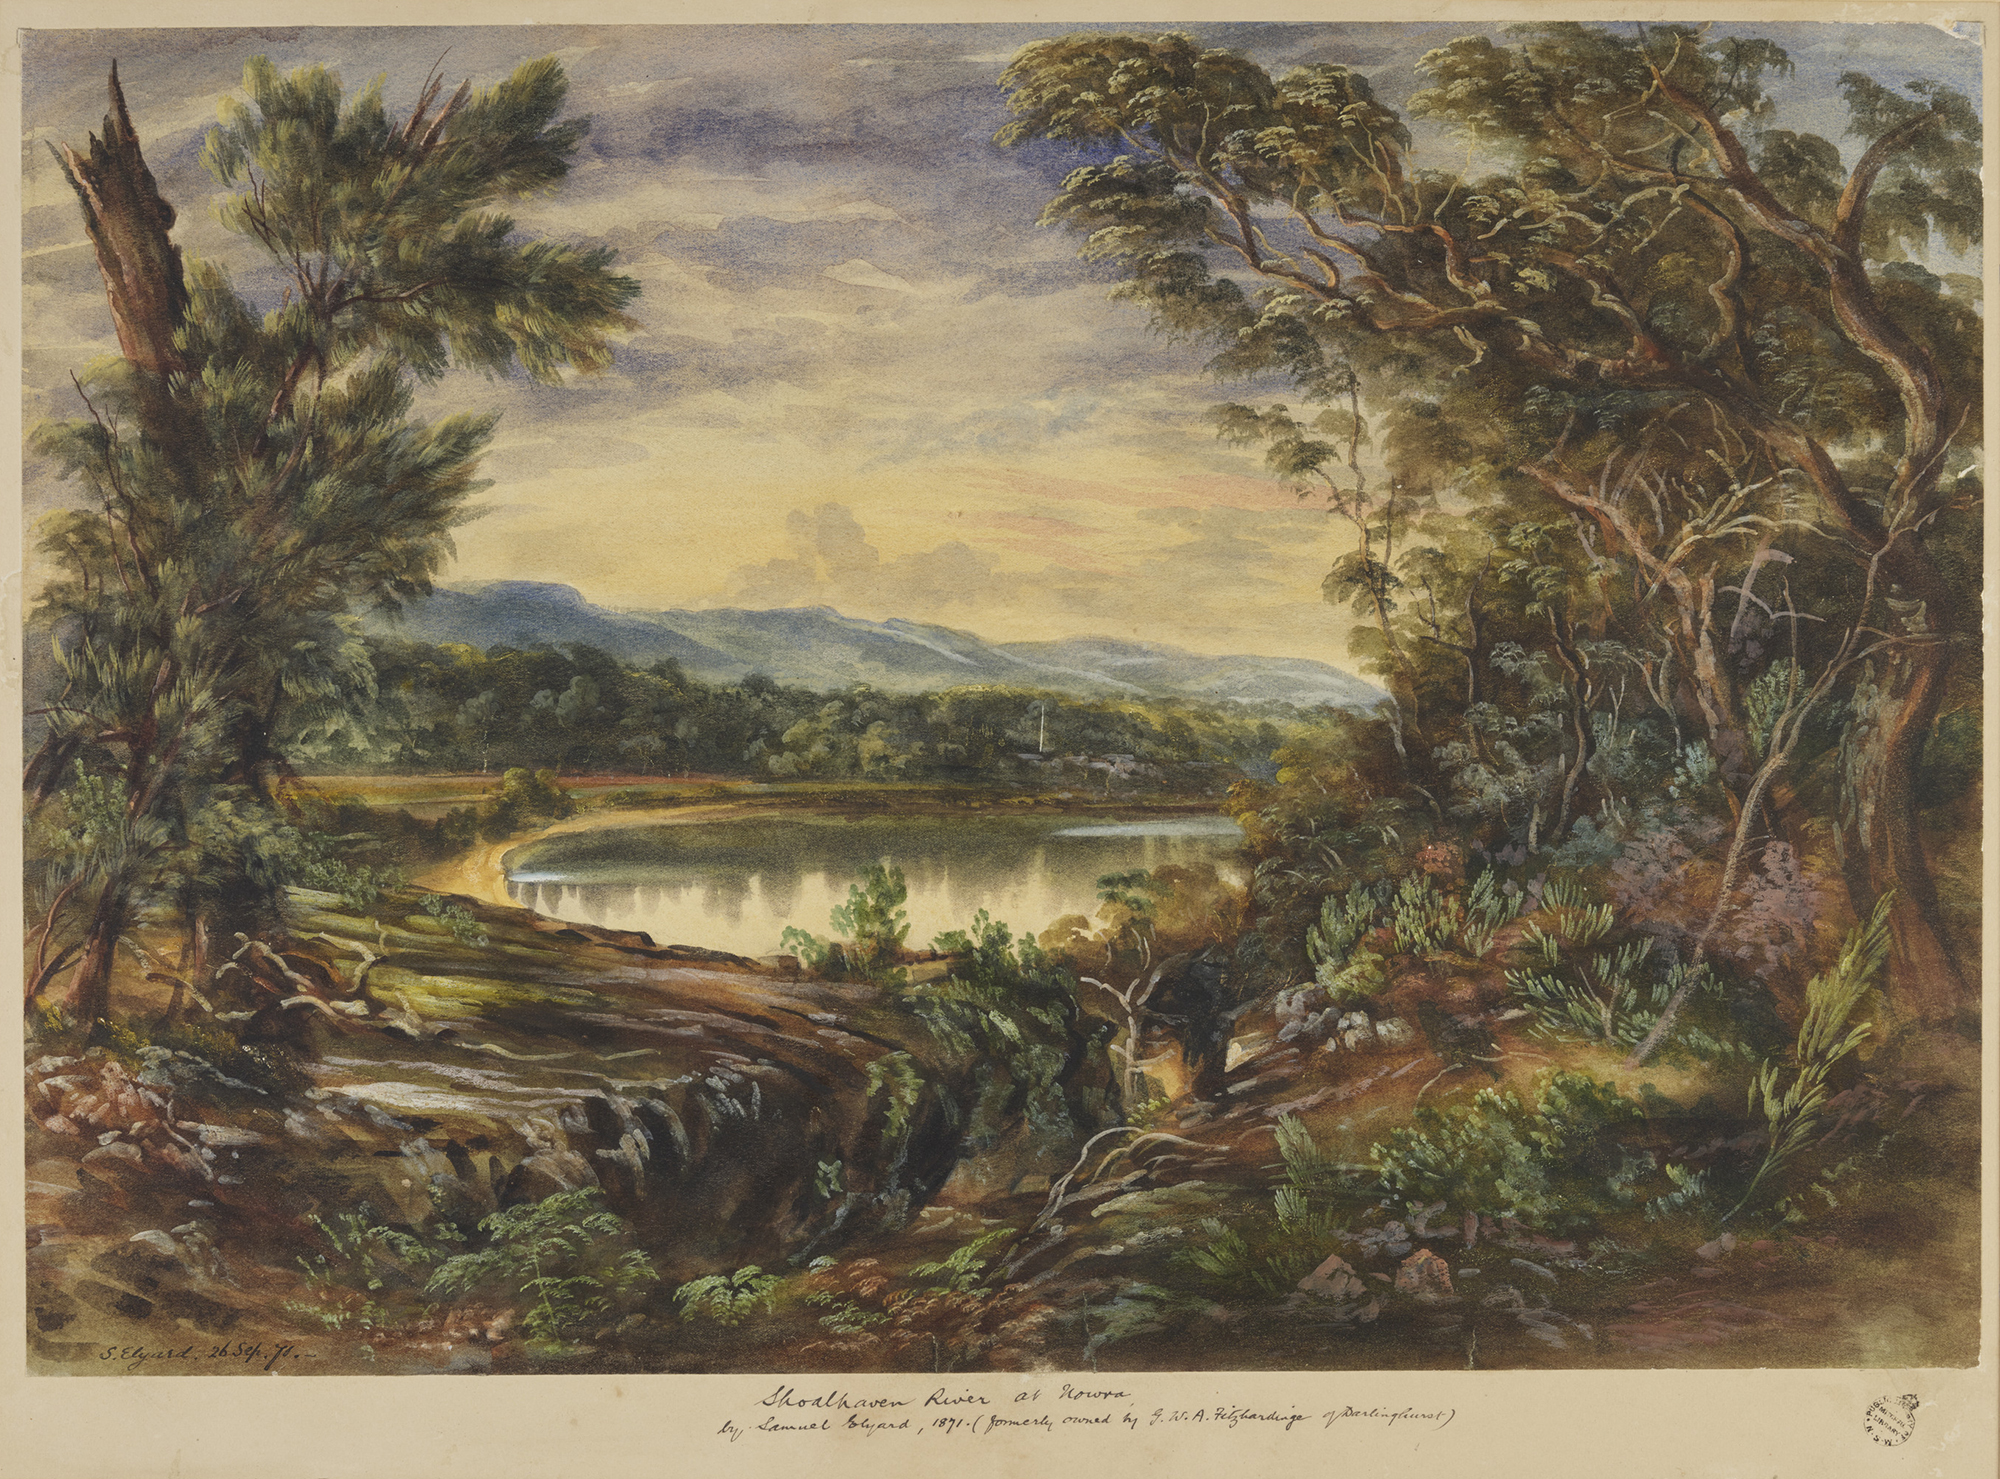 Painting of the Shoalhaven River. The scene appears at sunrise or sunset with the sky in yellow and purple. Dark trees frame the edges of the frame and are reflected in the still water of the river. 